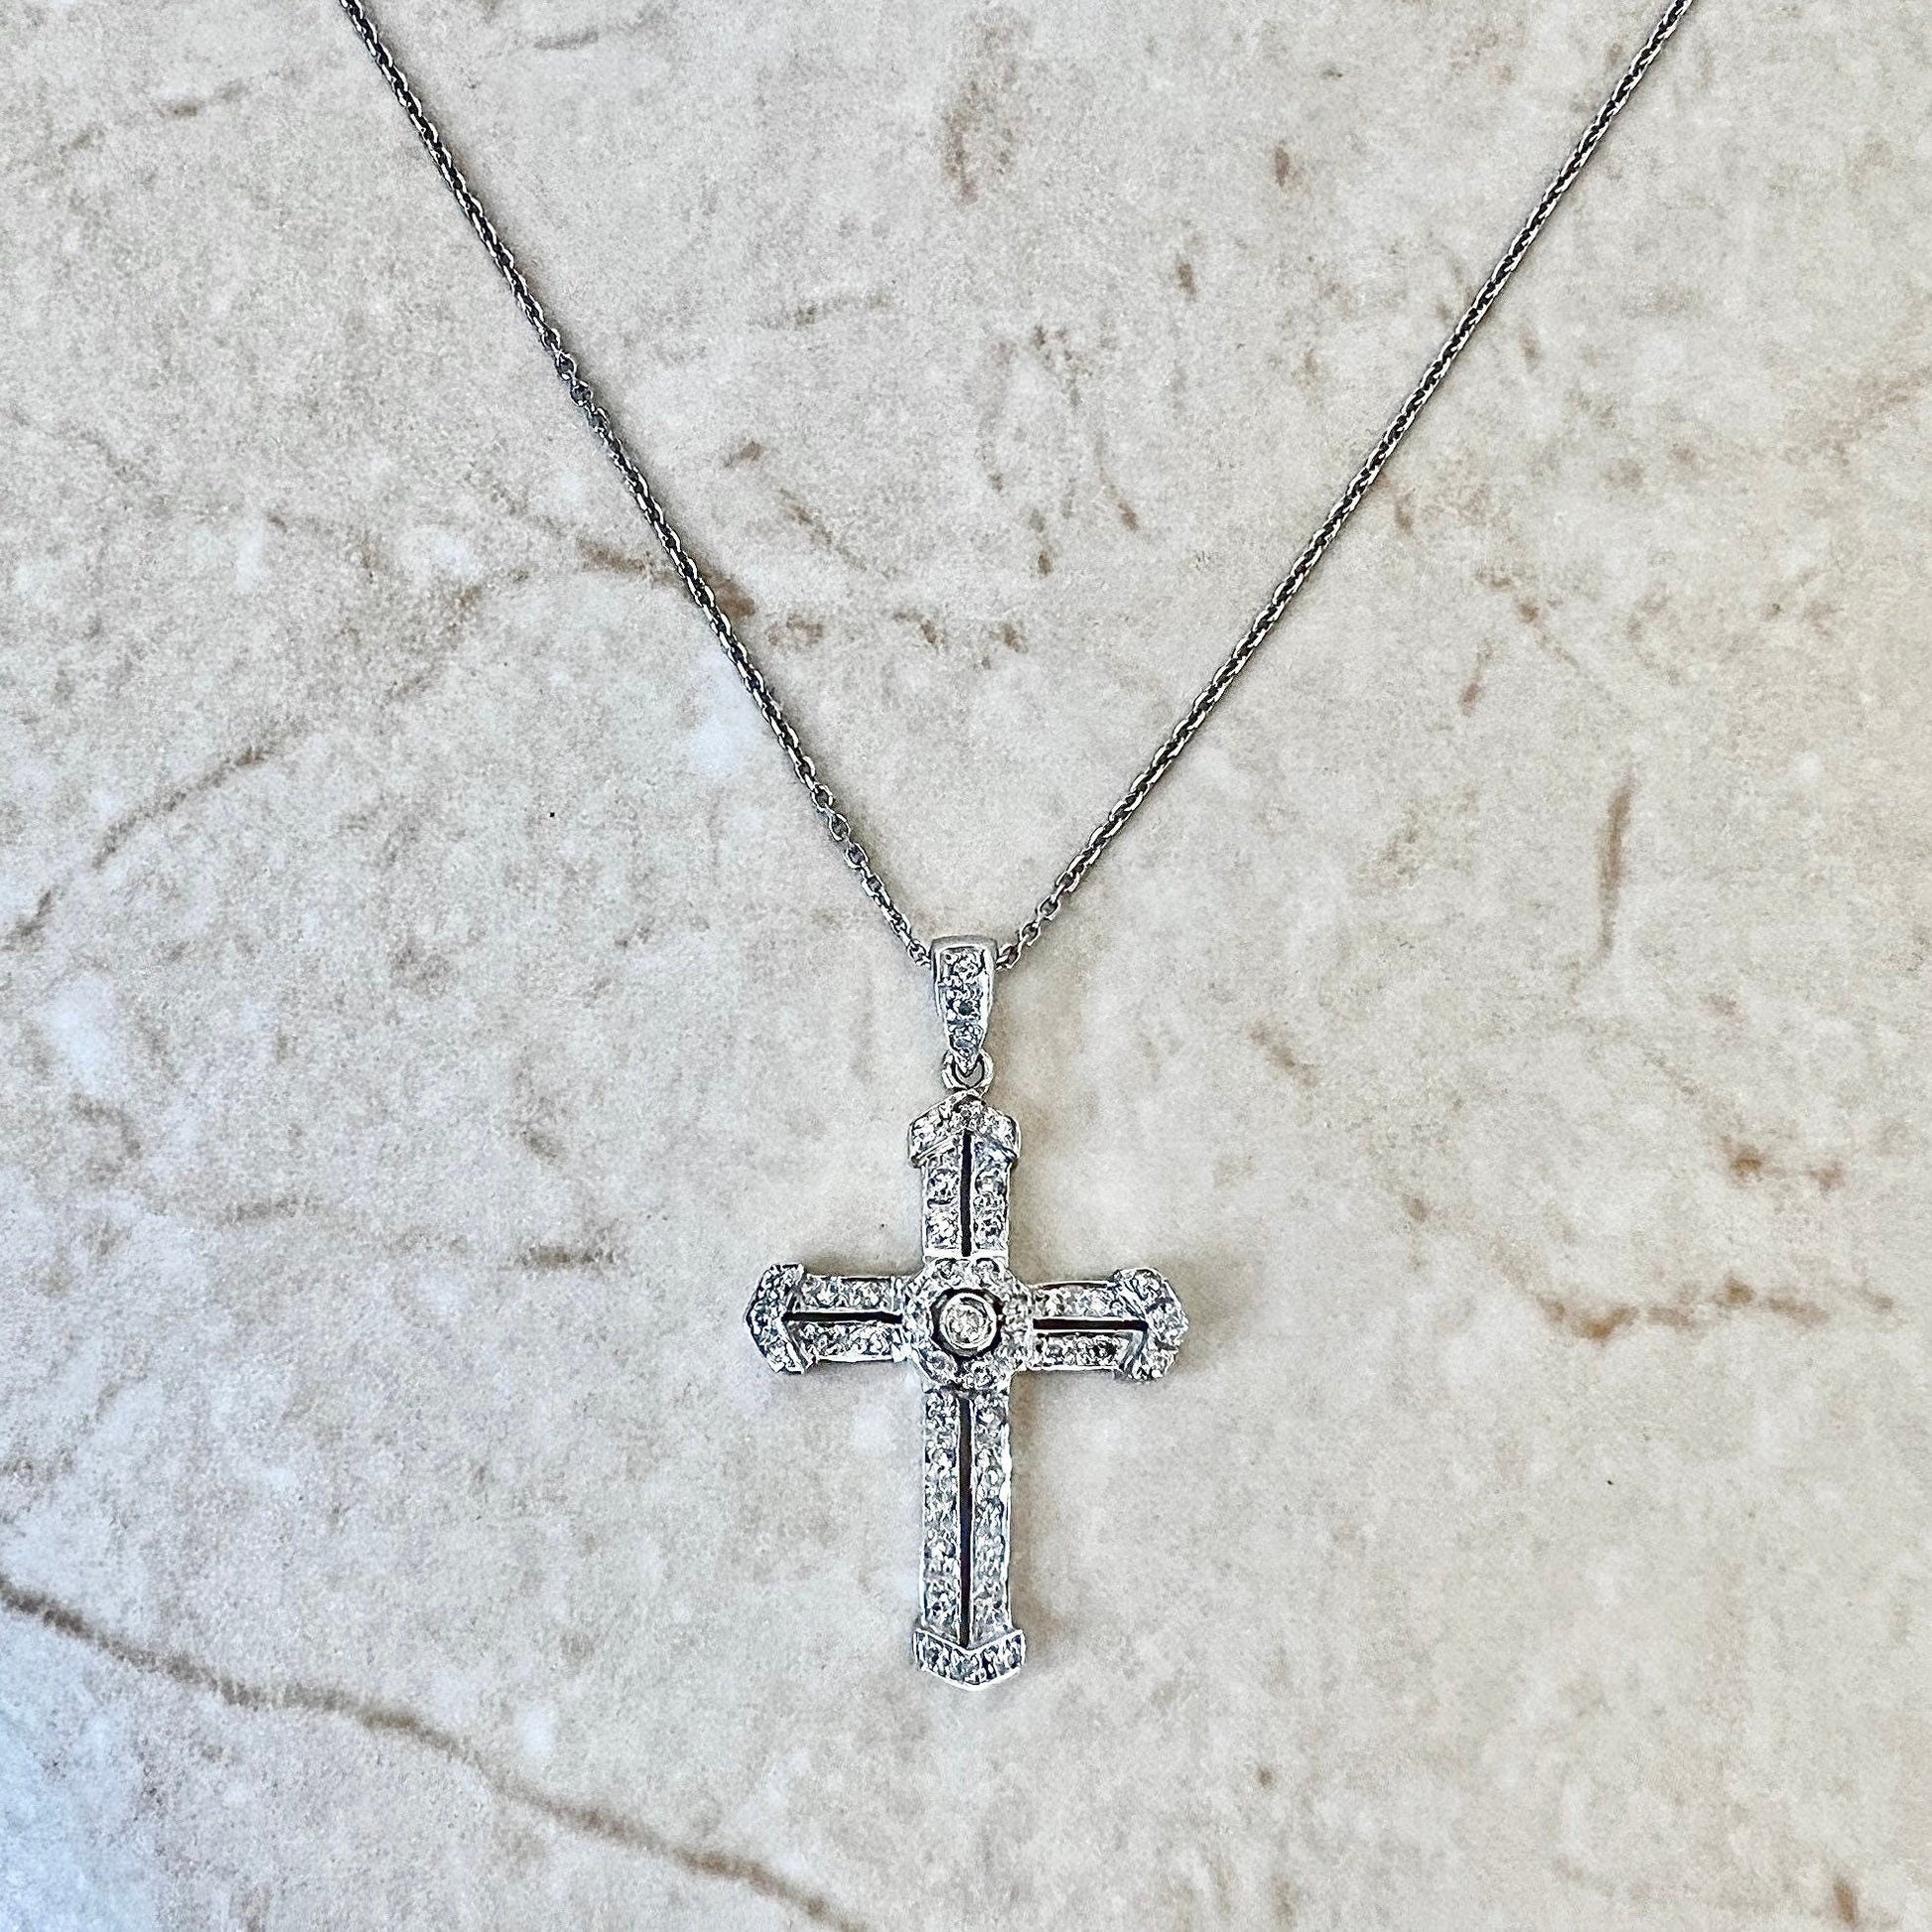 Vintage 18K Diamond Cross Pendant Necklace - White Gold Cross - Diamond Necklace - Religious Jewelry - Christmas Gift For Her -Jewelry Sale